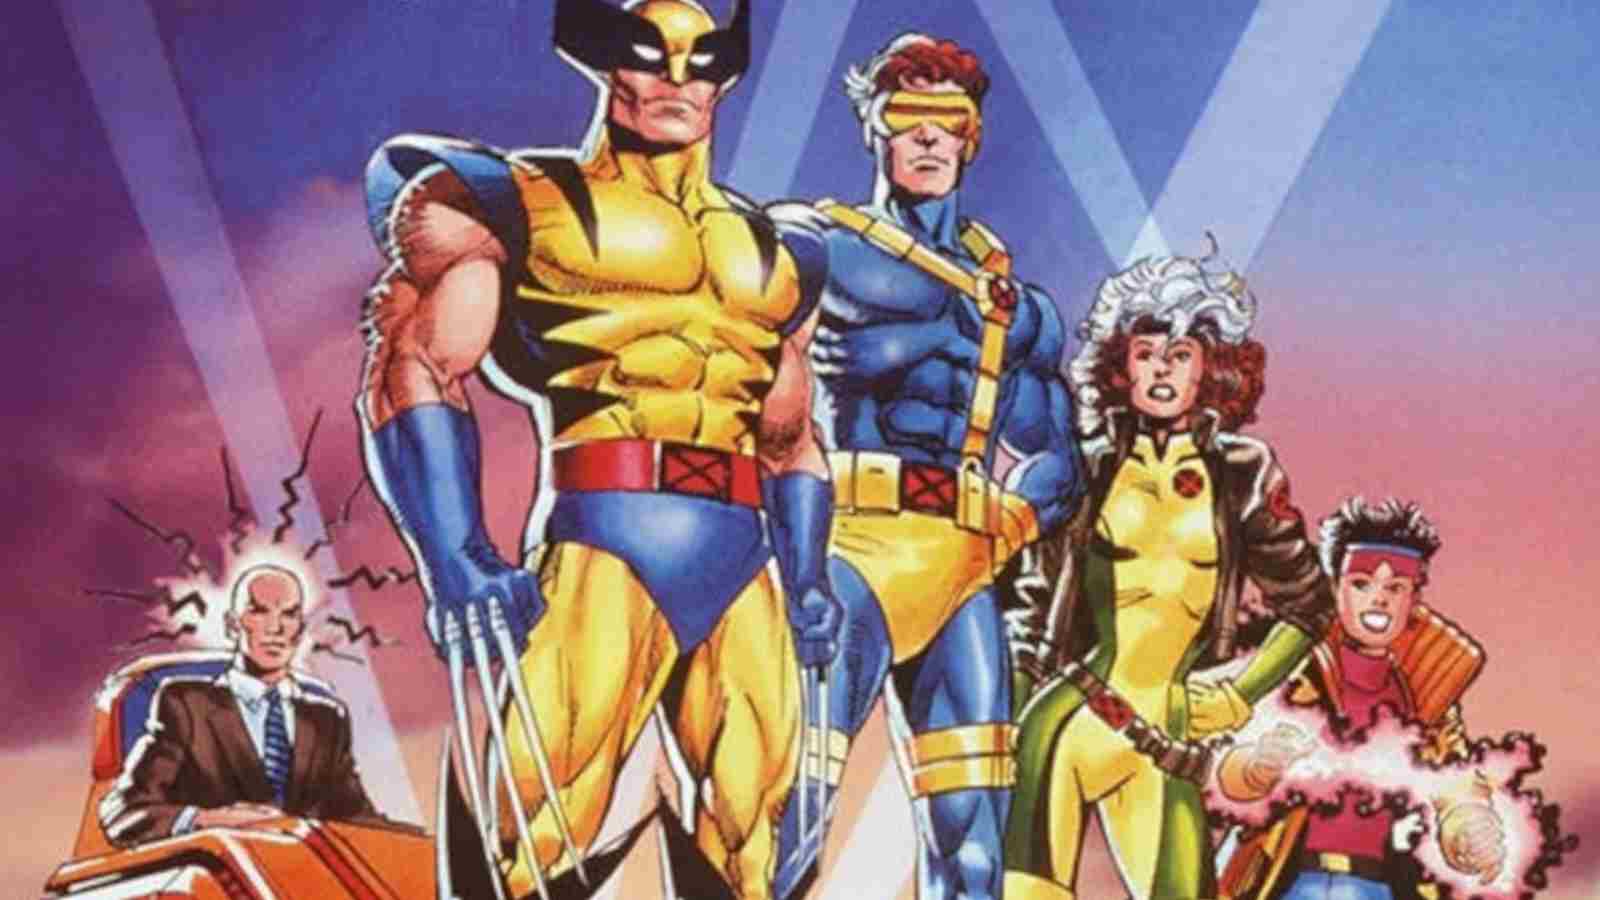 XMen 97 Animated Series Plot, Characters, Cast, Release Date And More